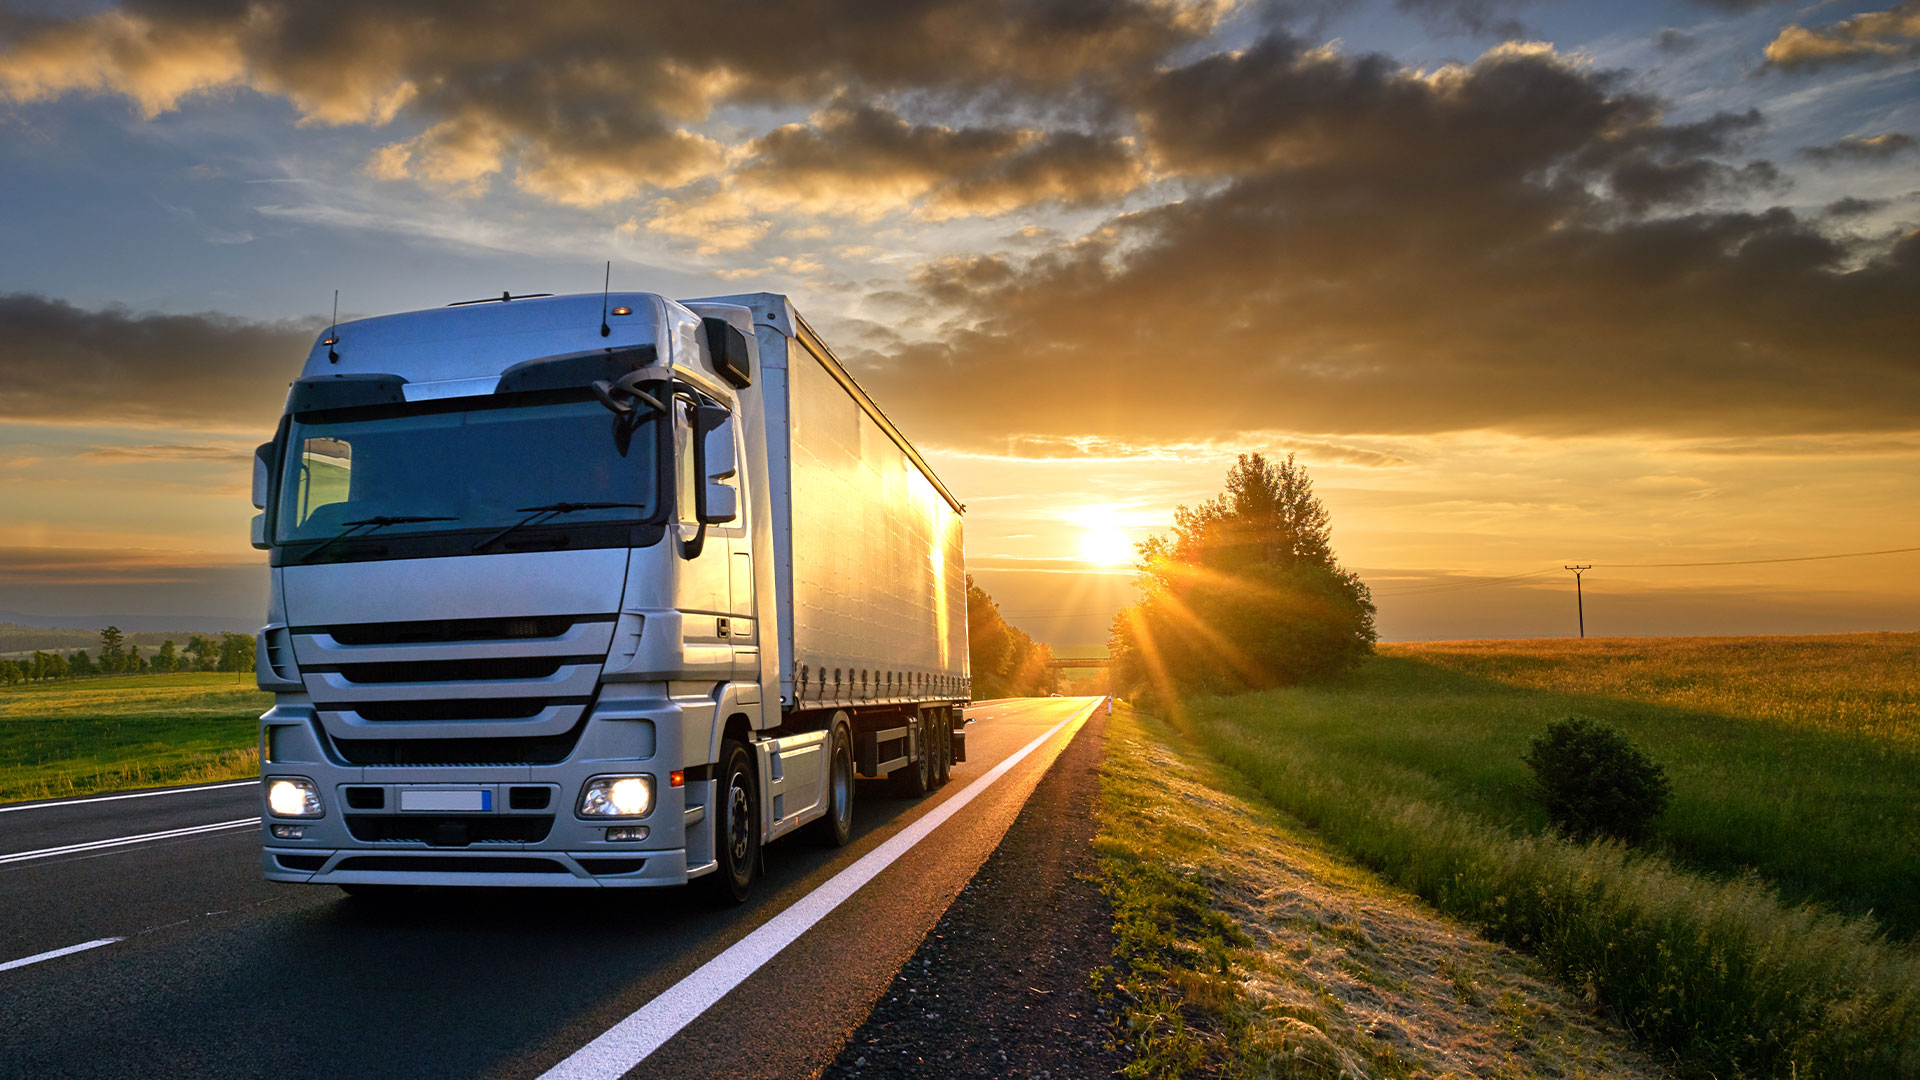 <span>We Provide Highest Quality </span><br>
Freight Services